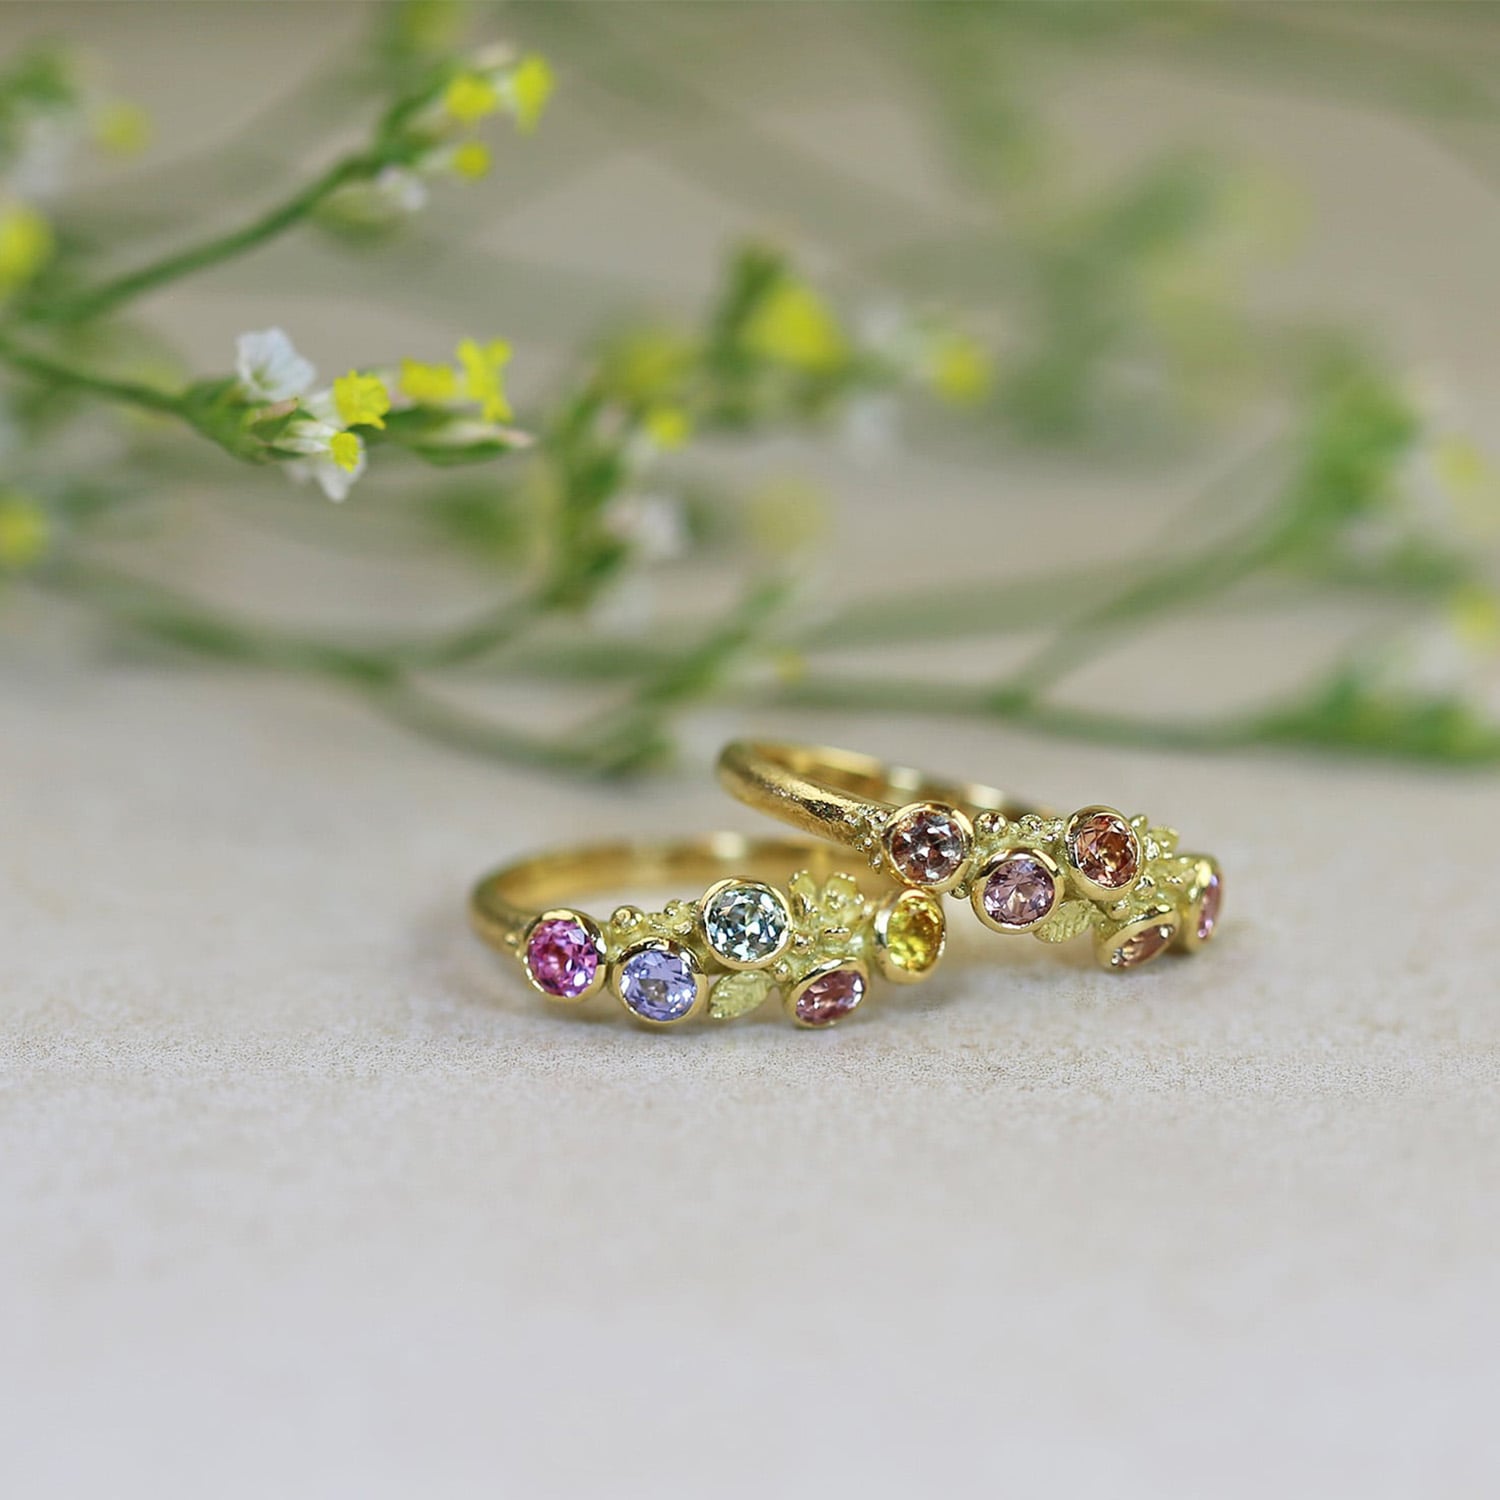 2 alex Monroe Jewellery solid gold Beekeeper Nectar Ring with Five 'Sunset' Sapphires rings